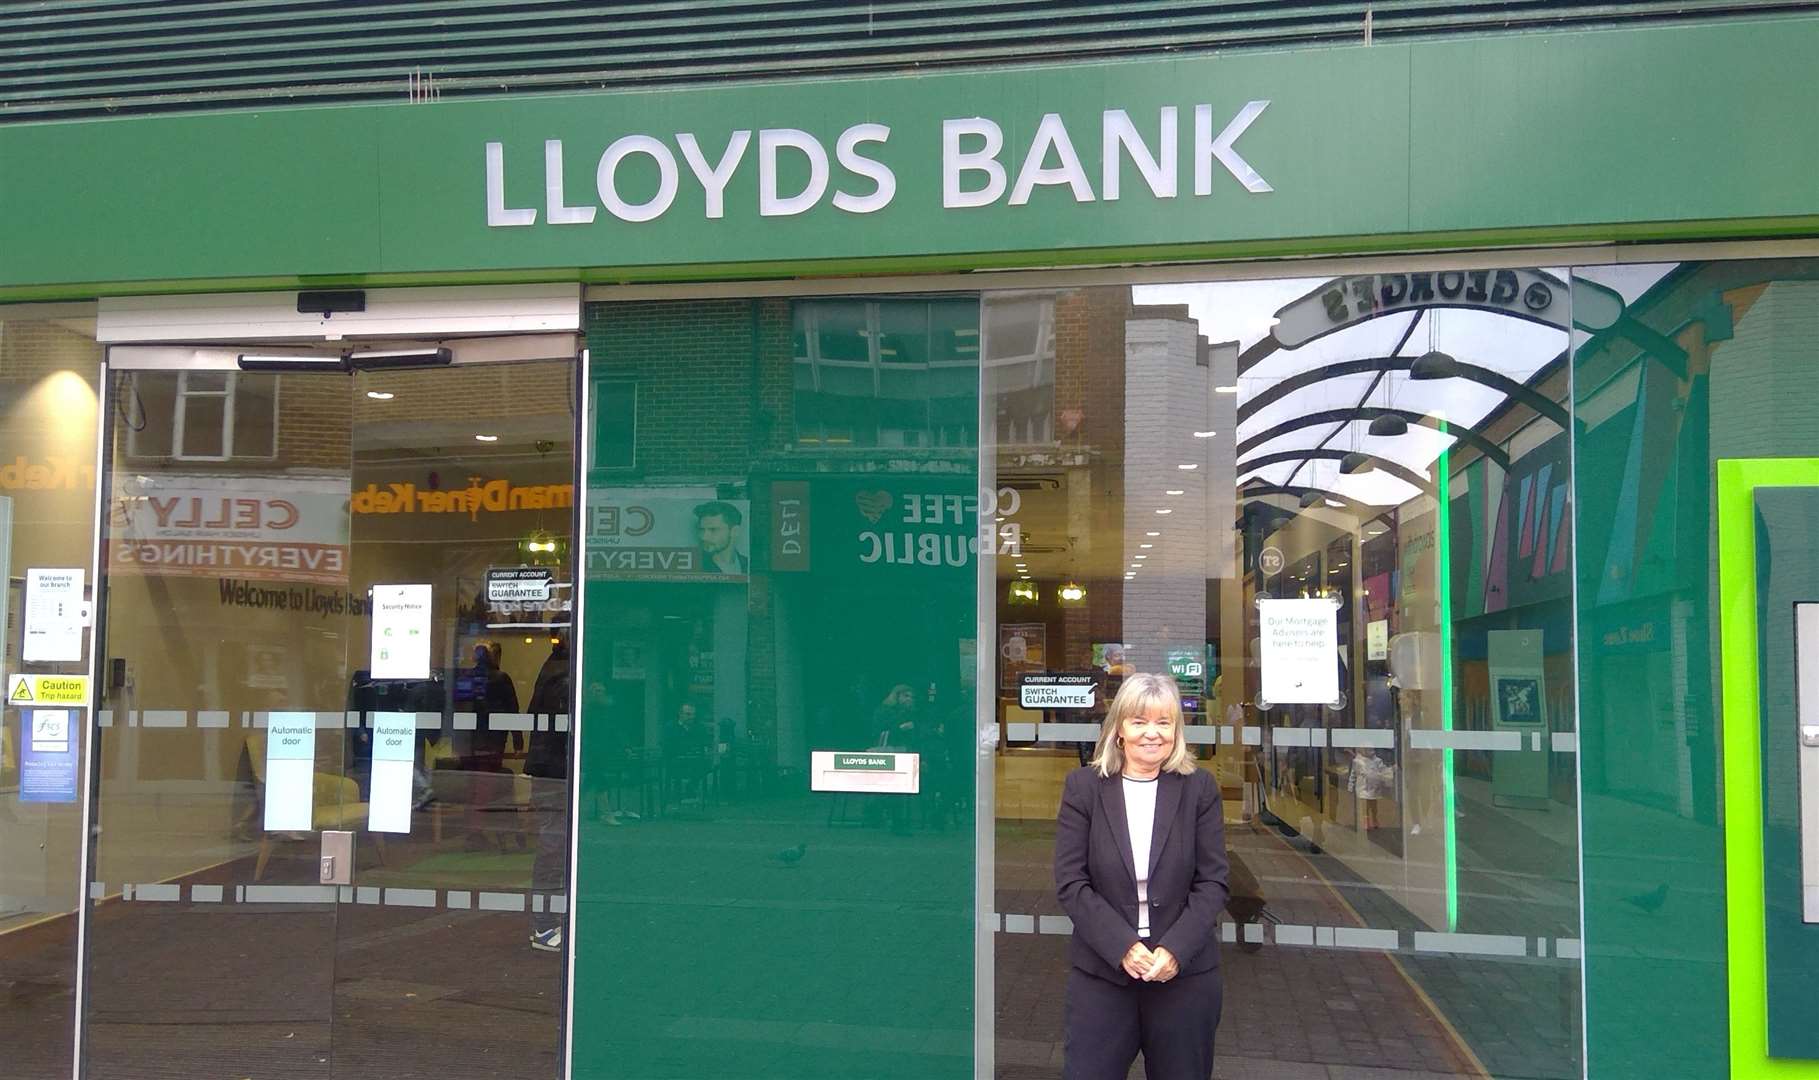 Janice Peters outside Lloyds Bank in New Road, Gravesend